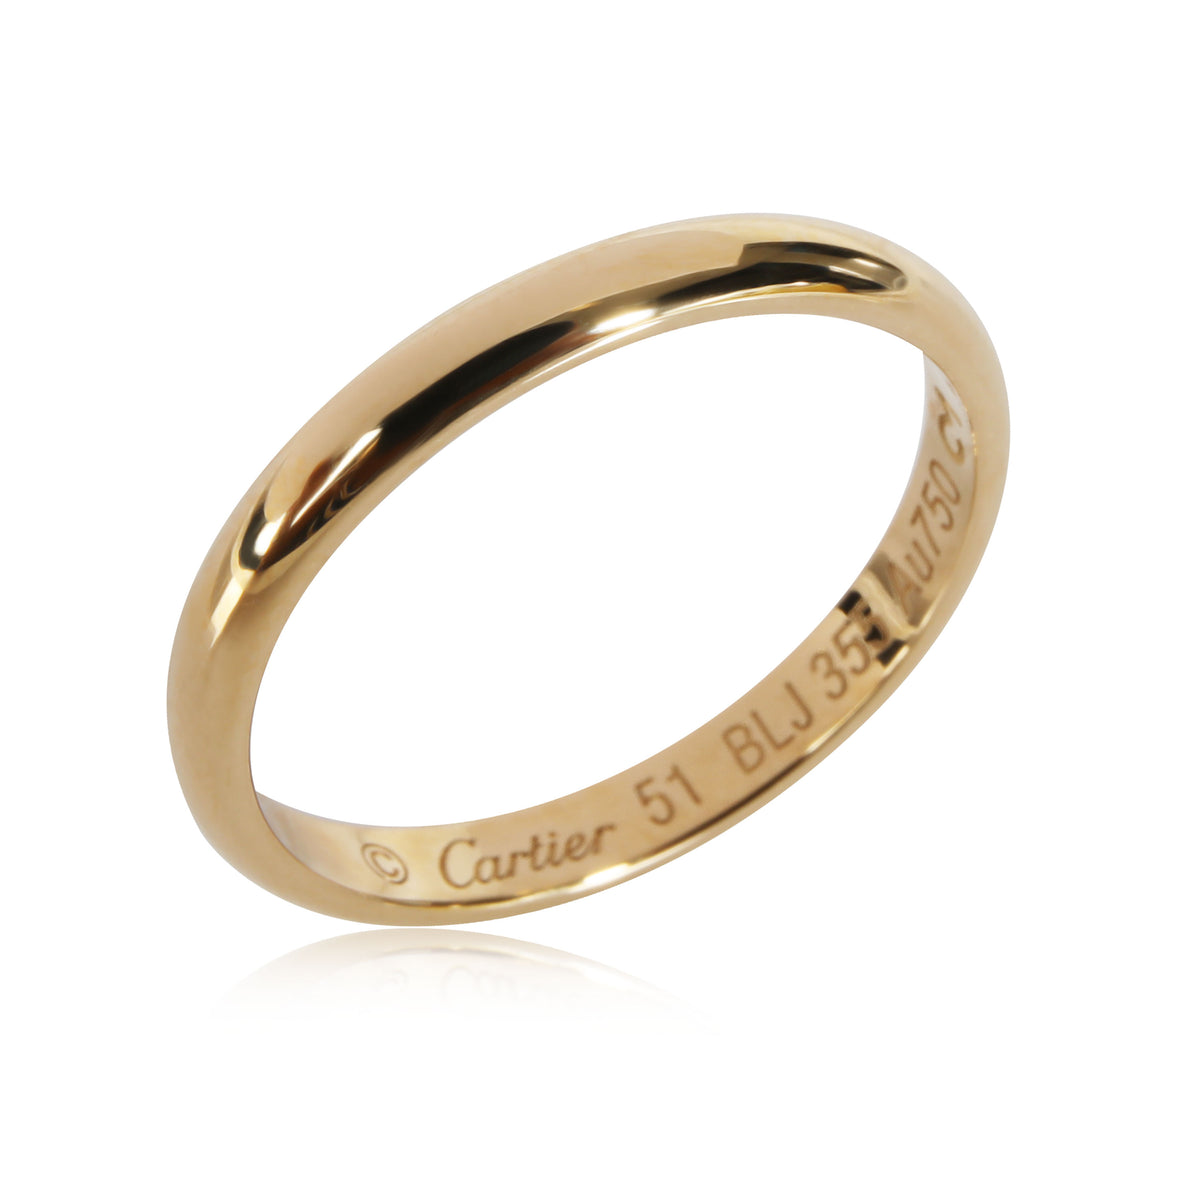 Cartier 1895 Wedding Band in 18K Yellow Gold